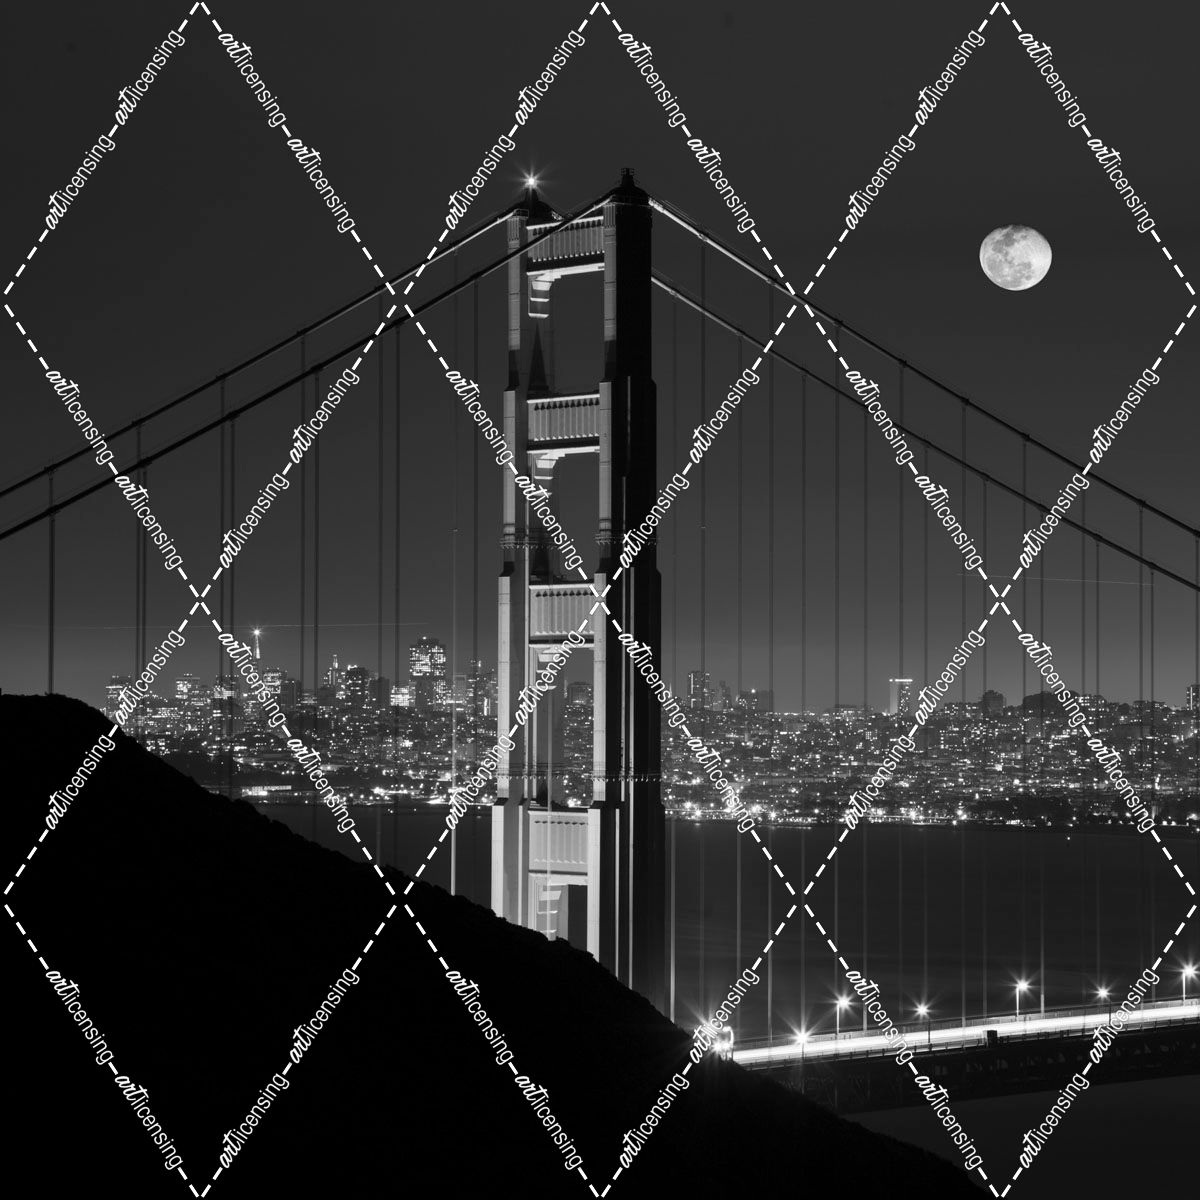 Golden Gate and Moon BW